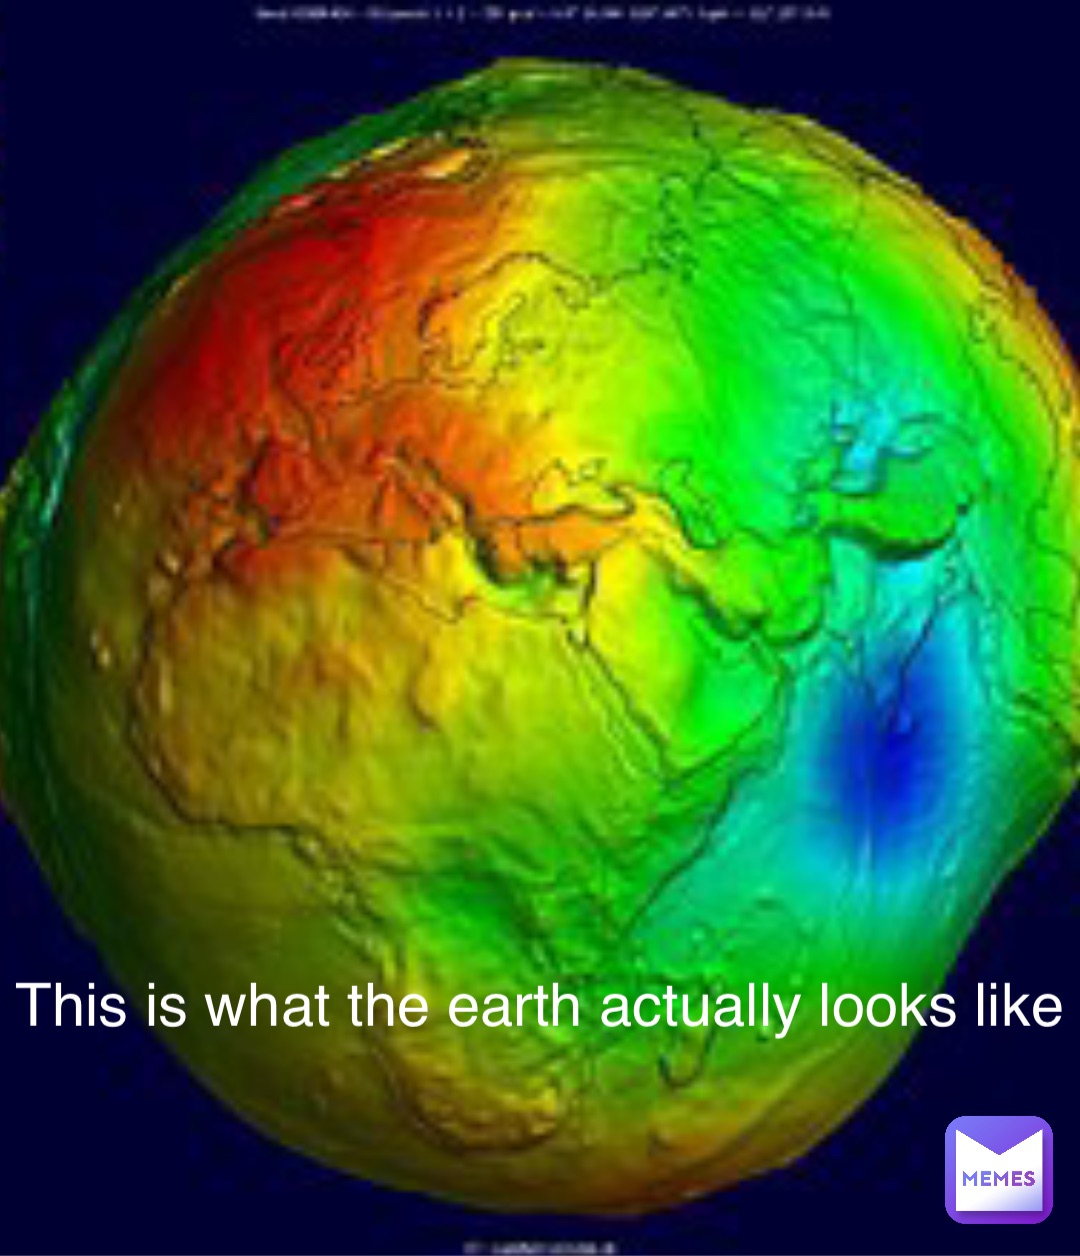 This is what the earth actually looks like